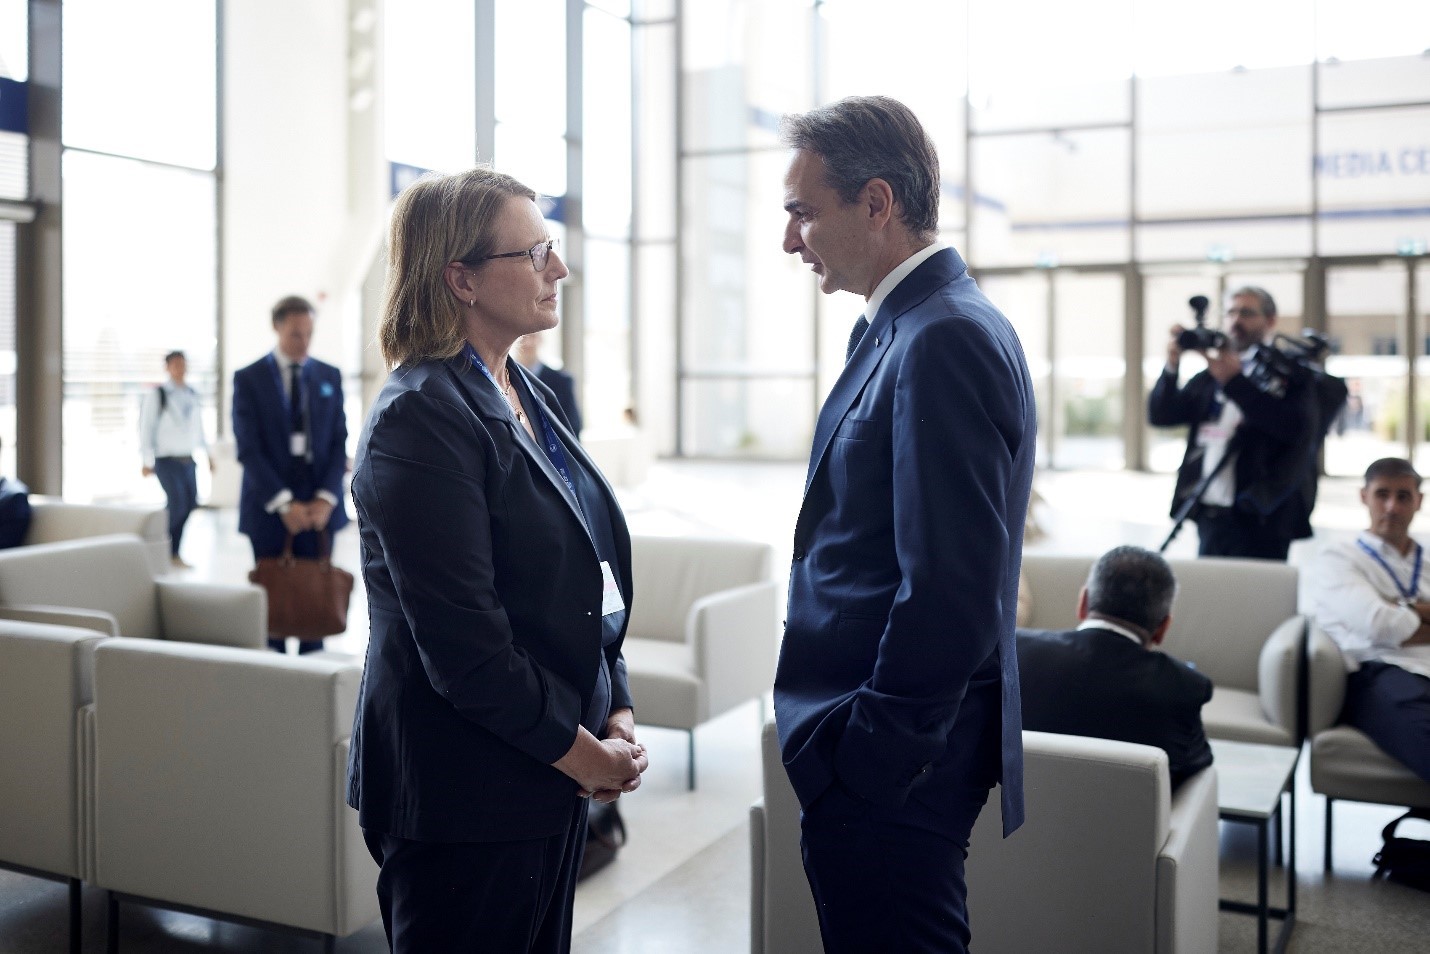 Greek Prime Minister Kyriakos Mitsotakis (right) and FEMA Administrator Deanne Criswell (left) discuss the importance of resiliency in the face of worsening disasters during their brief meeting at COP28. (Dimitris Papamitsos, Official photographer to the Greek Prime Minister)